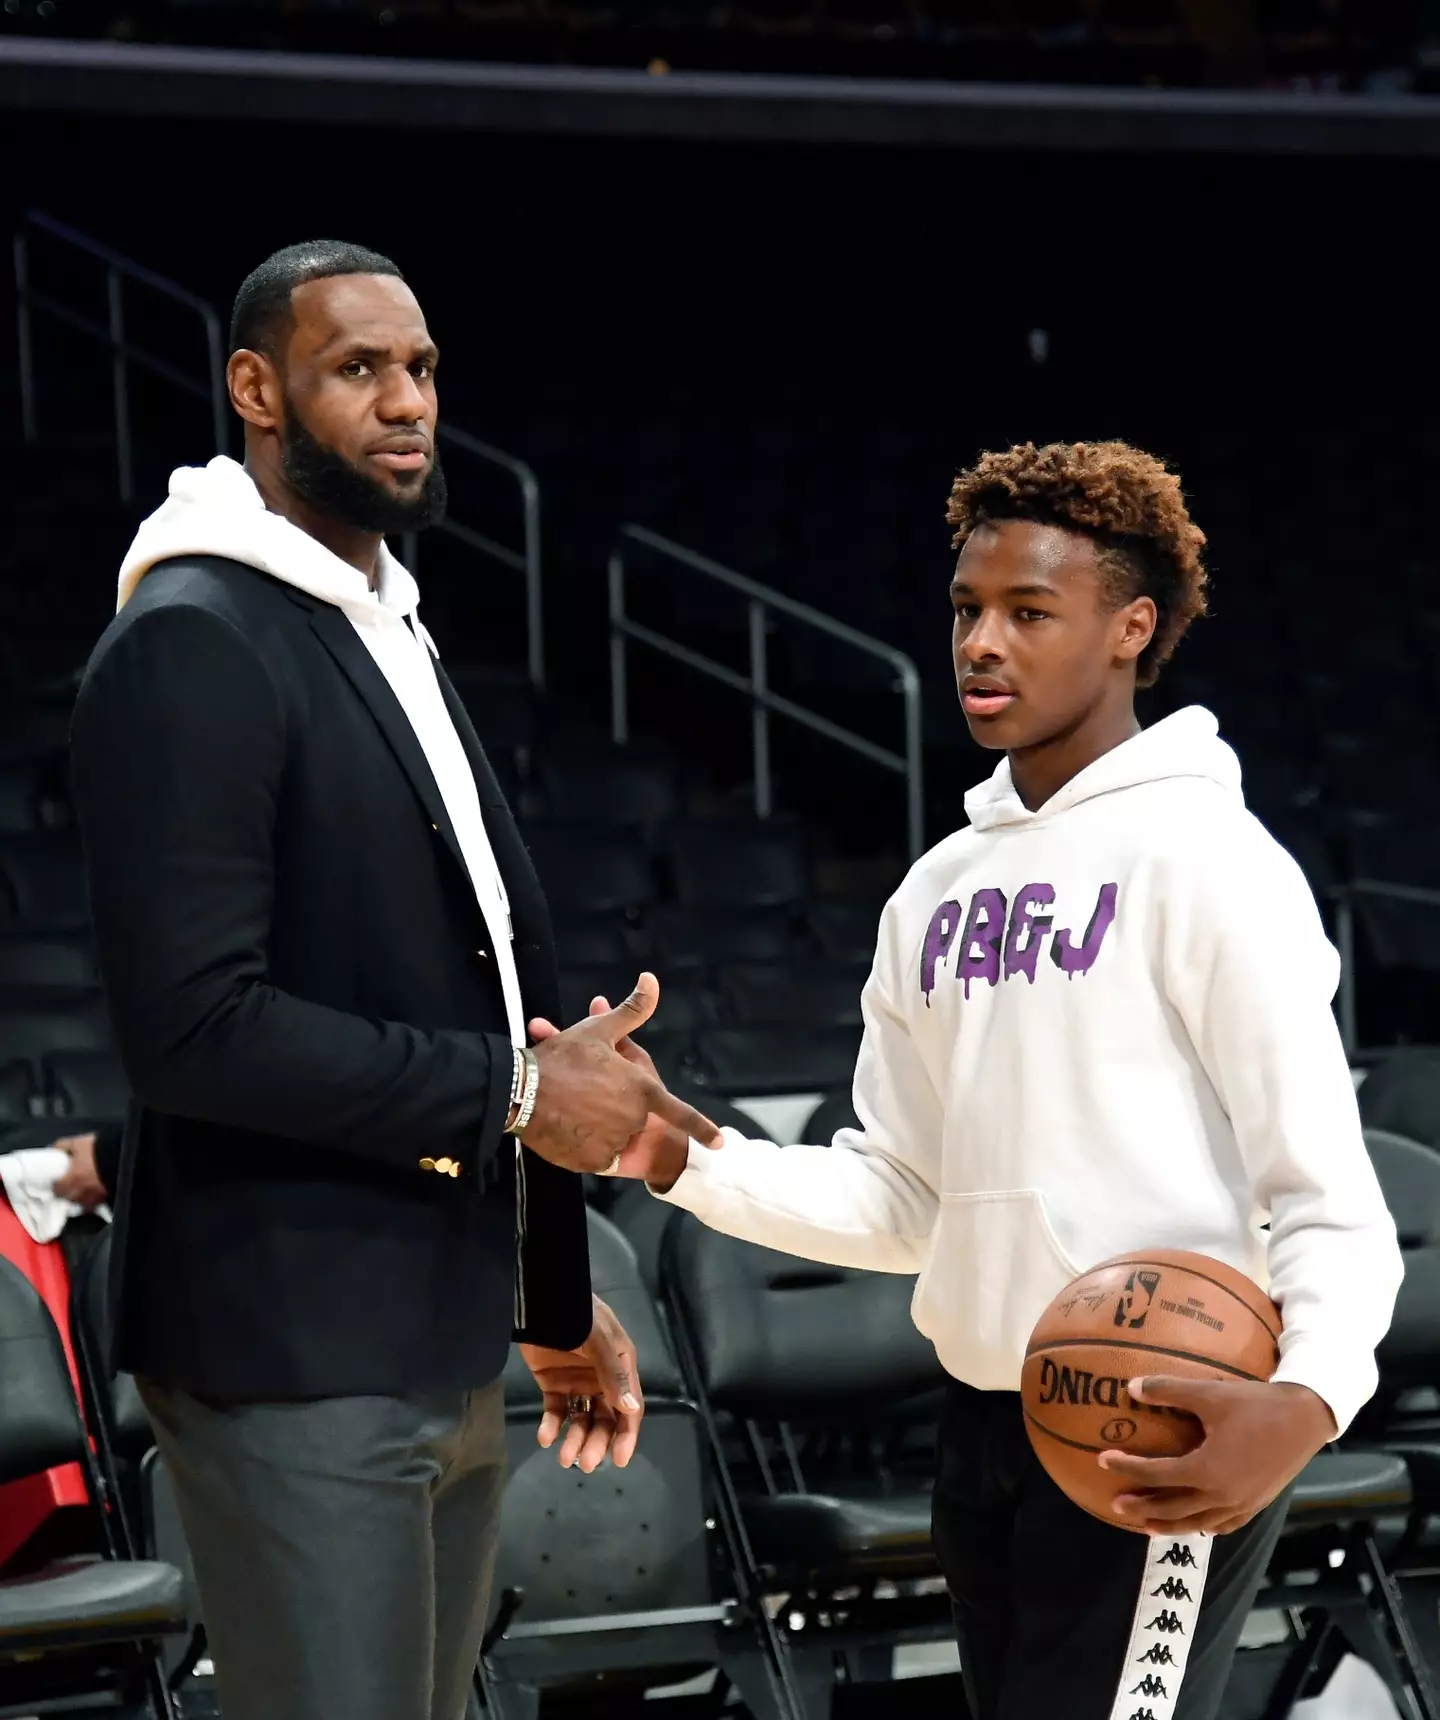 LeBron James also thanked medical staff for how they'd supported Bronny during his medical emergency.